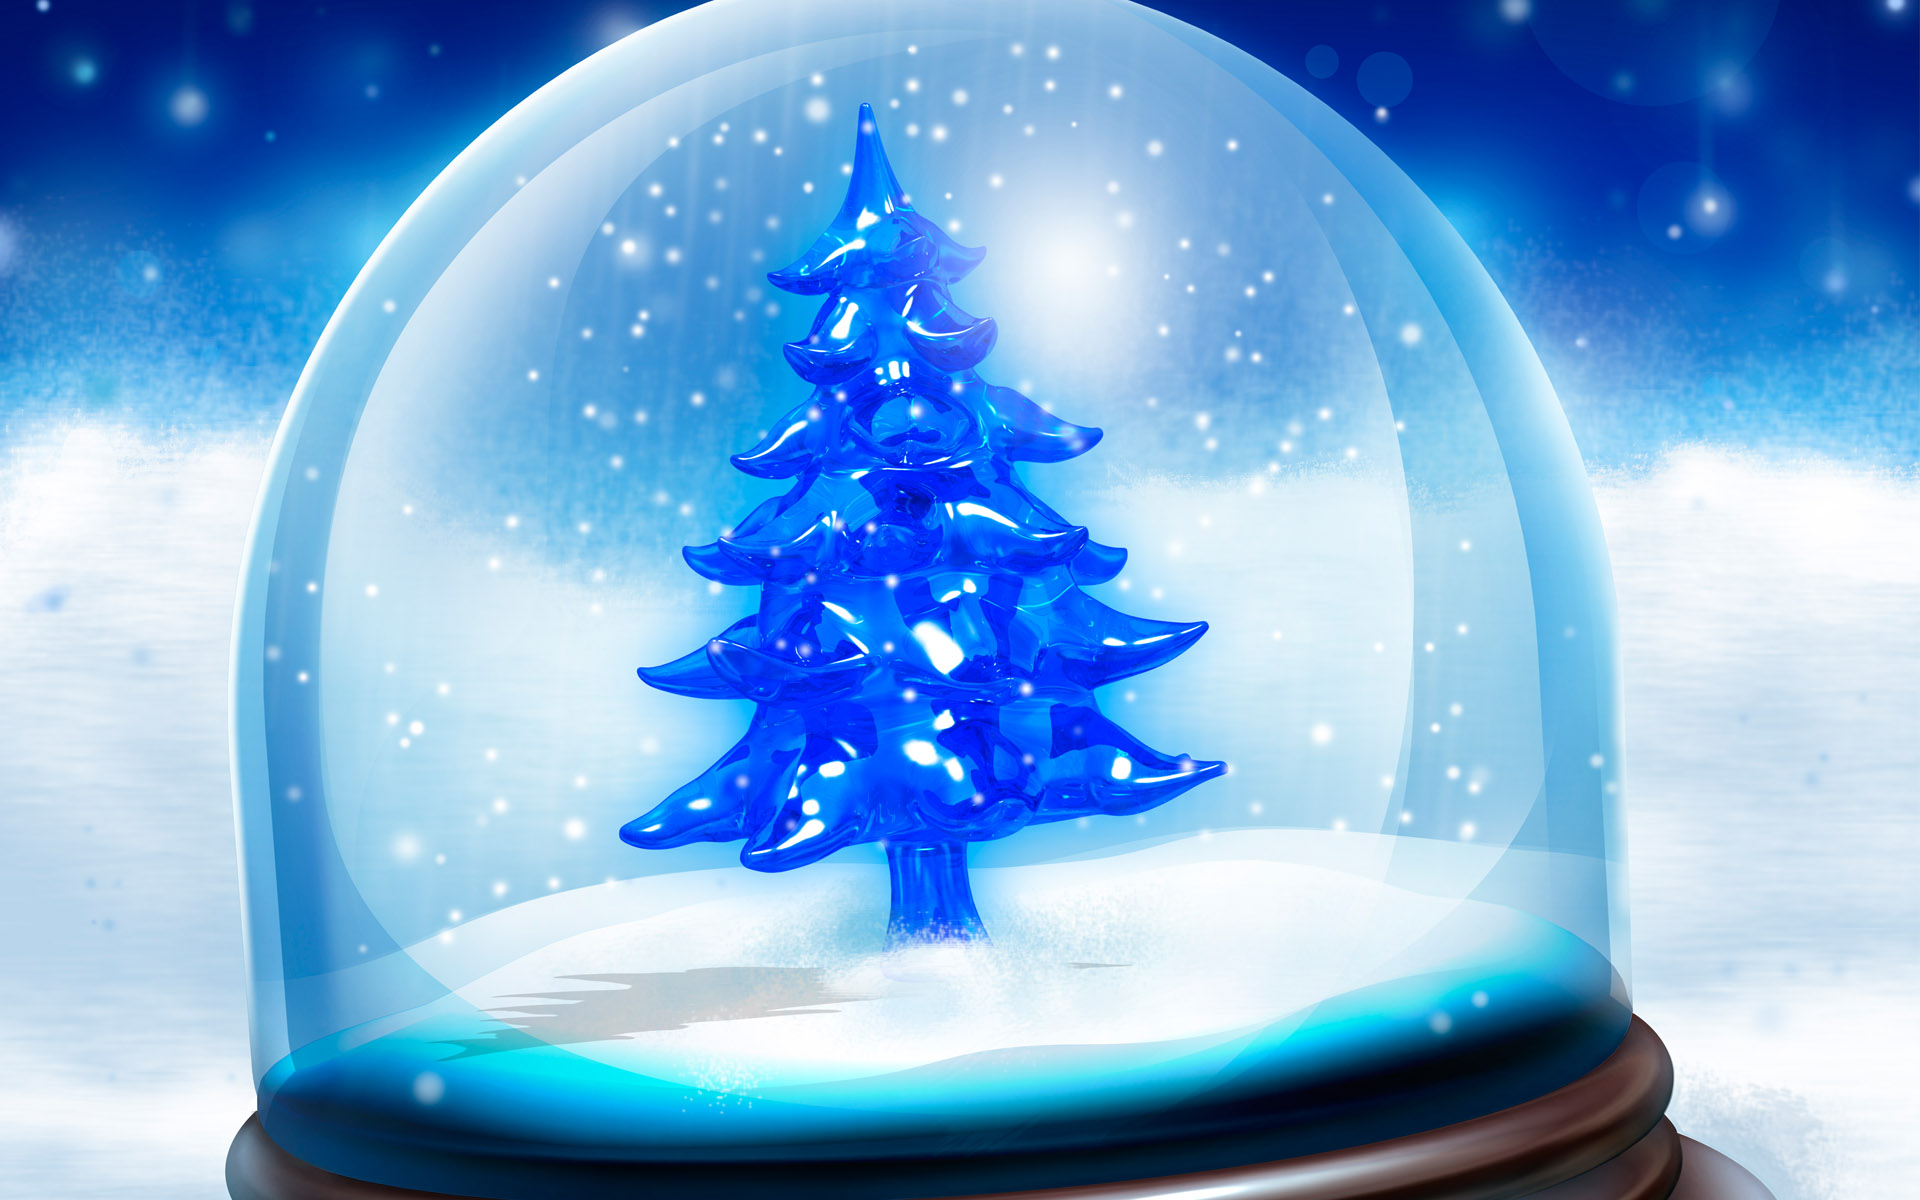 Free download 3D Christmas Tree Wallpaper 3D Christmas Tree Background [1920x1200] for your Desktop, Mobile & Tablet. Explore Free 3D Christmas Wallpaper. Free Animated Snowy Christmas Wallpaper, Animated Christmas